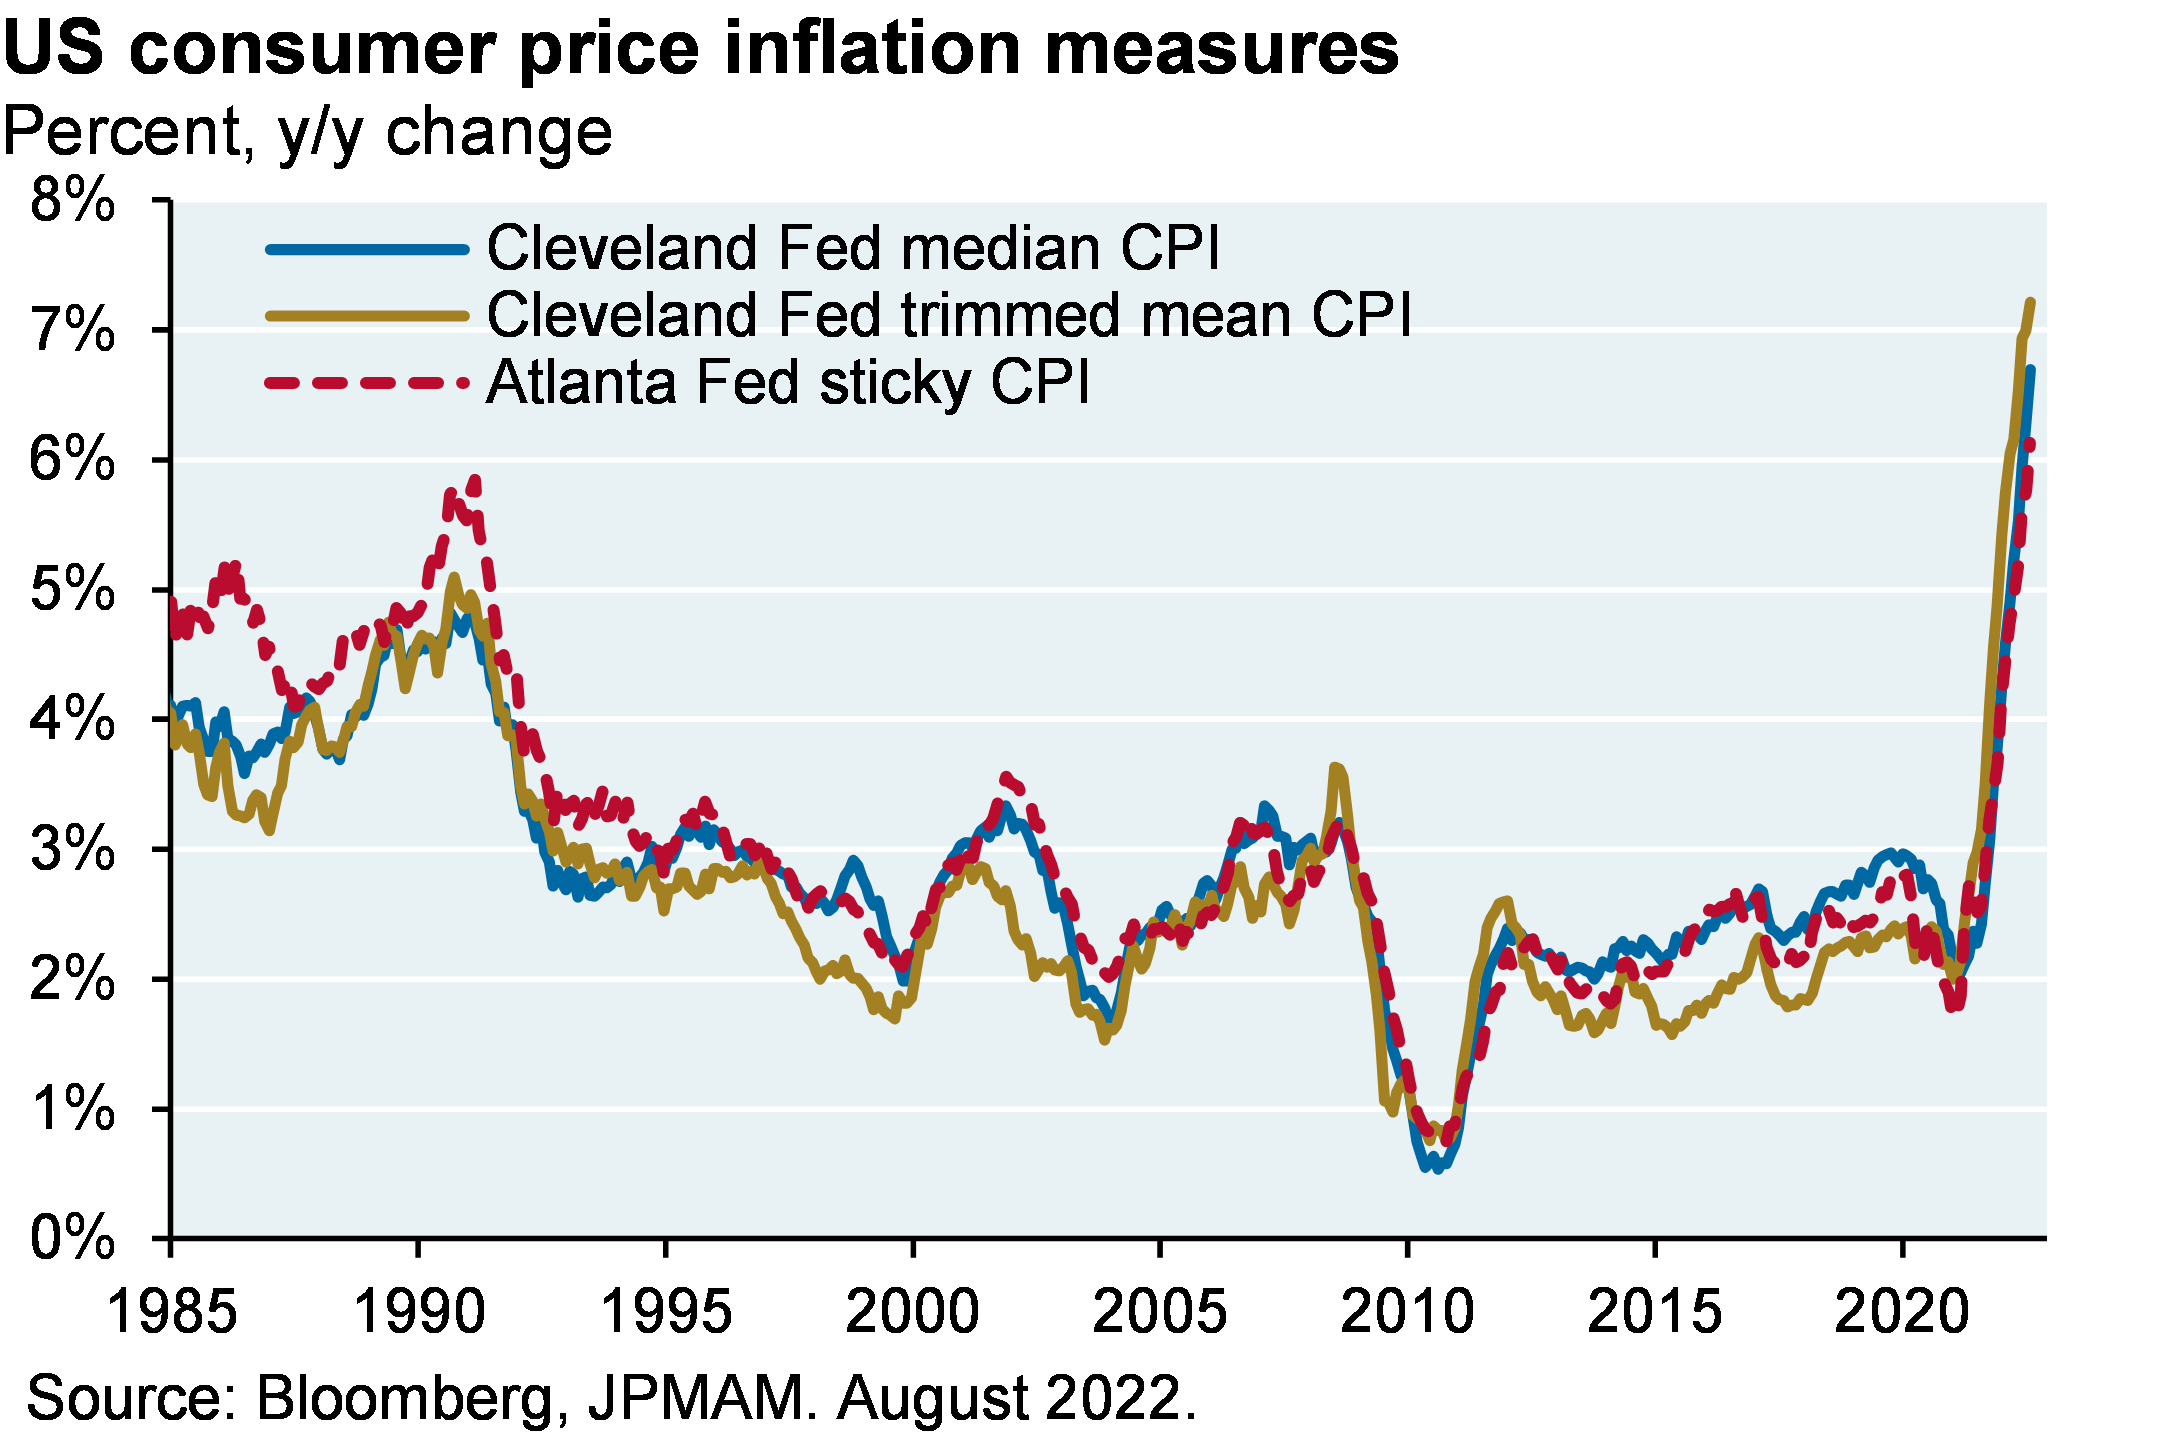 Line chart shows the year-over-year percent change for several key measures of consumer price inflation. On a year-over-year basis, each measure is at its highest level since 1985, with the Cleveland Fed trimmed mean CPI leading at 7.2%.